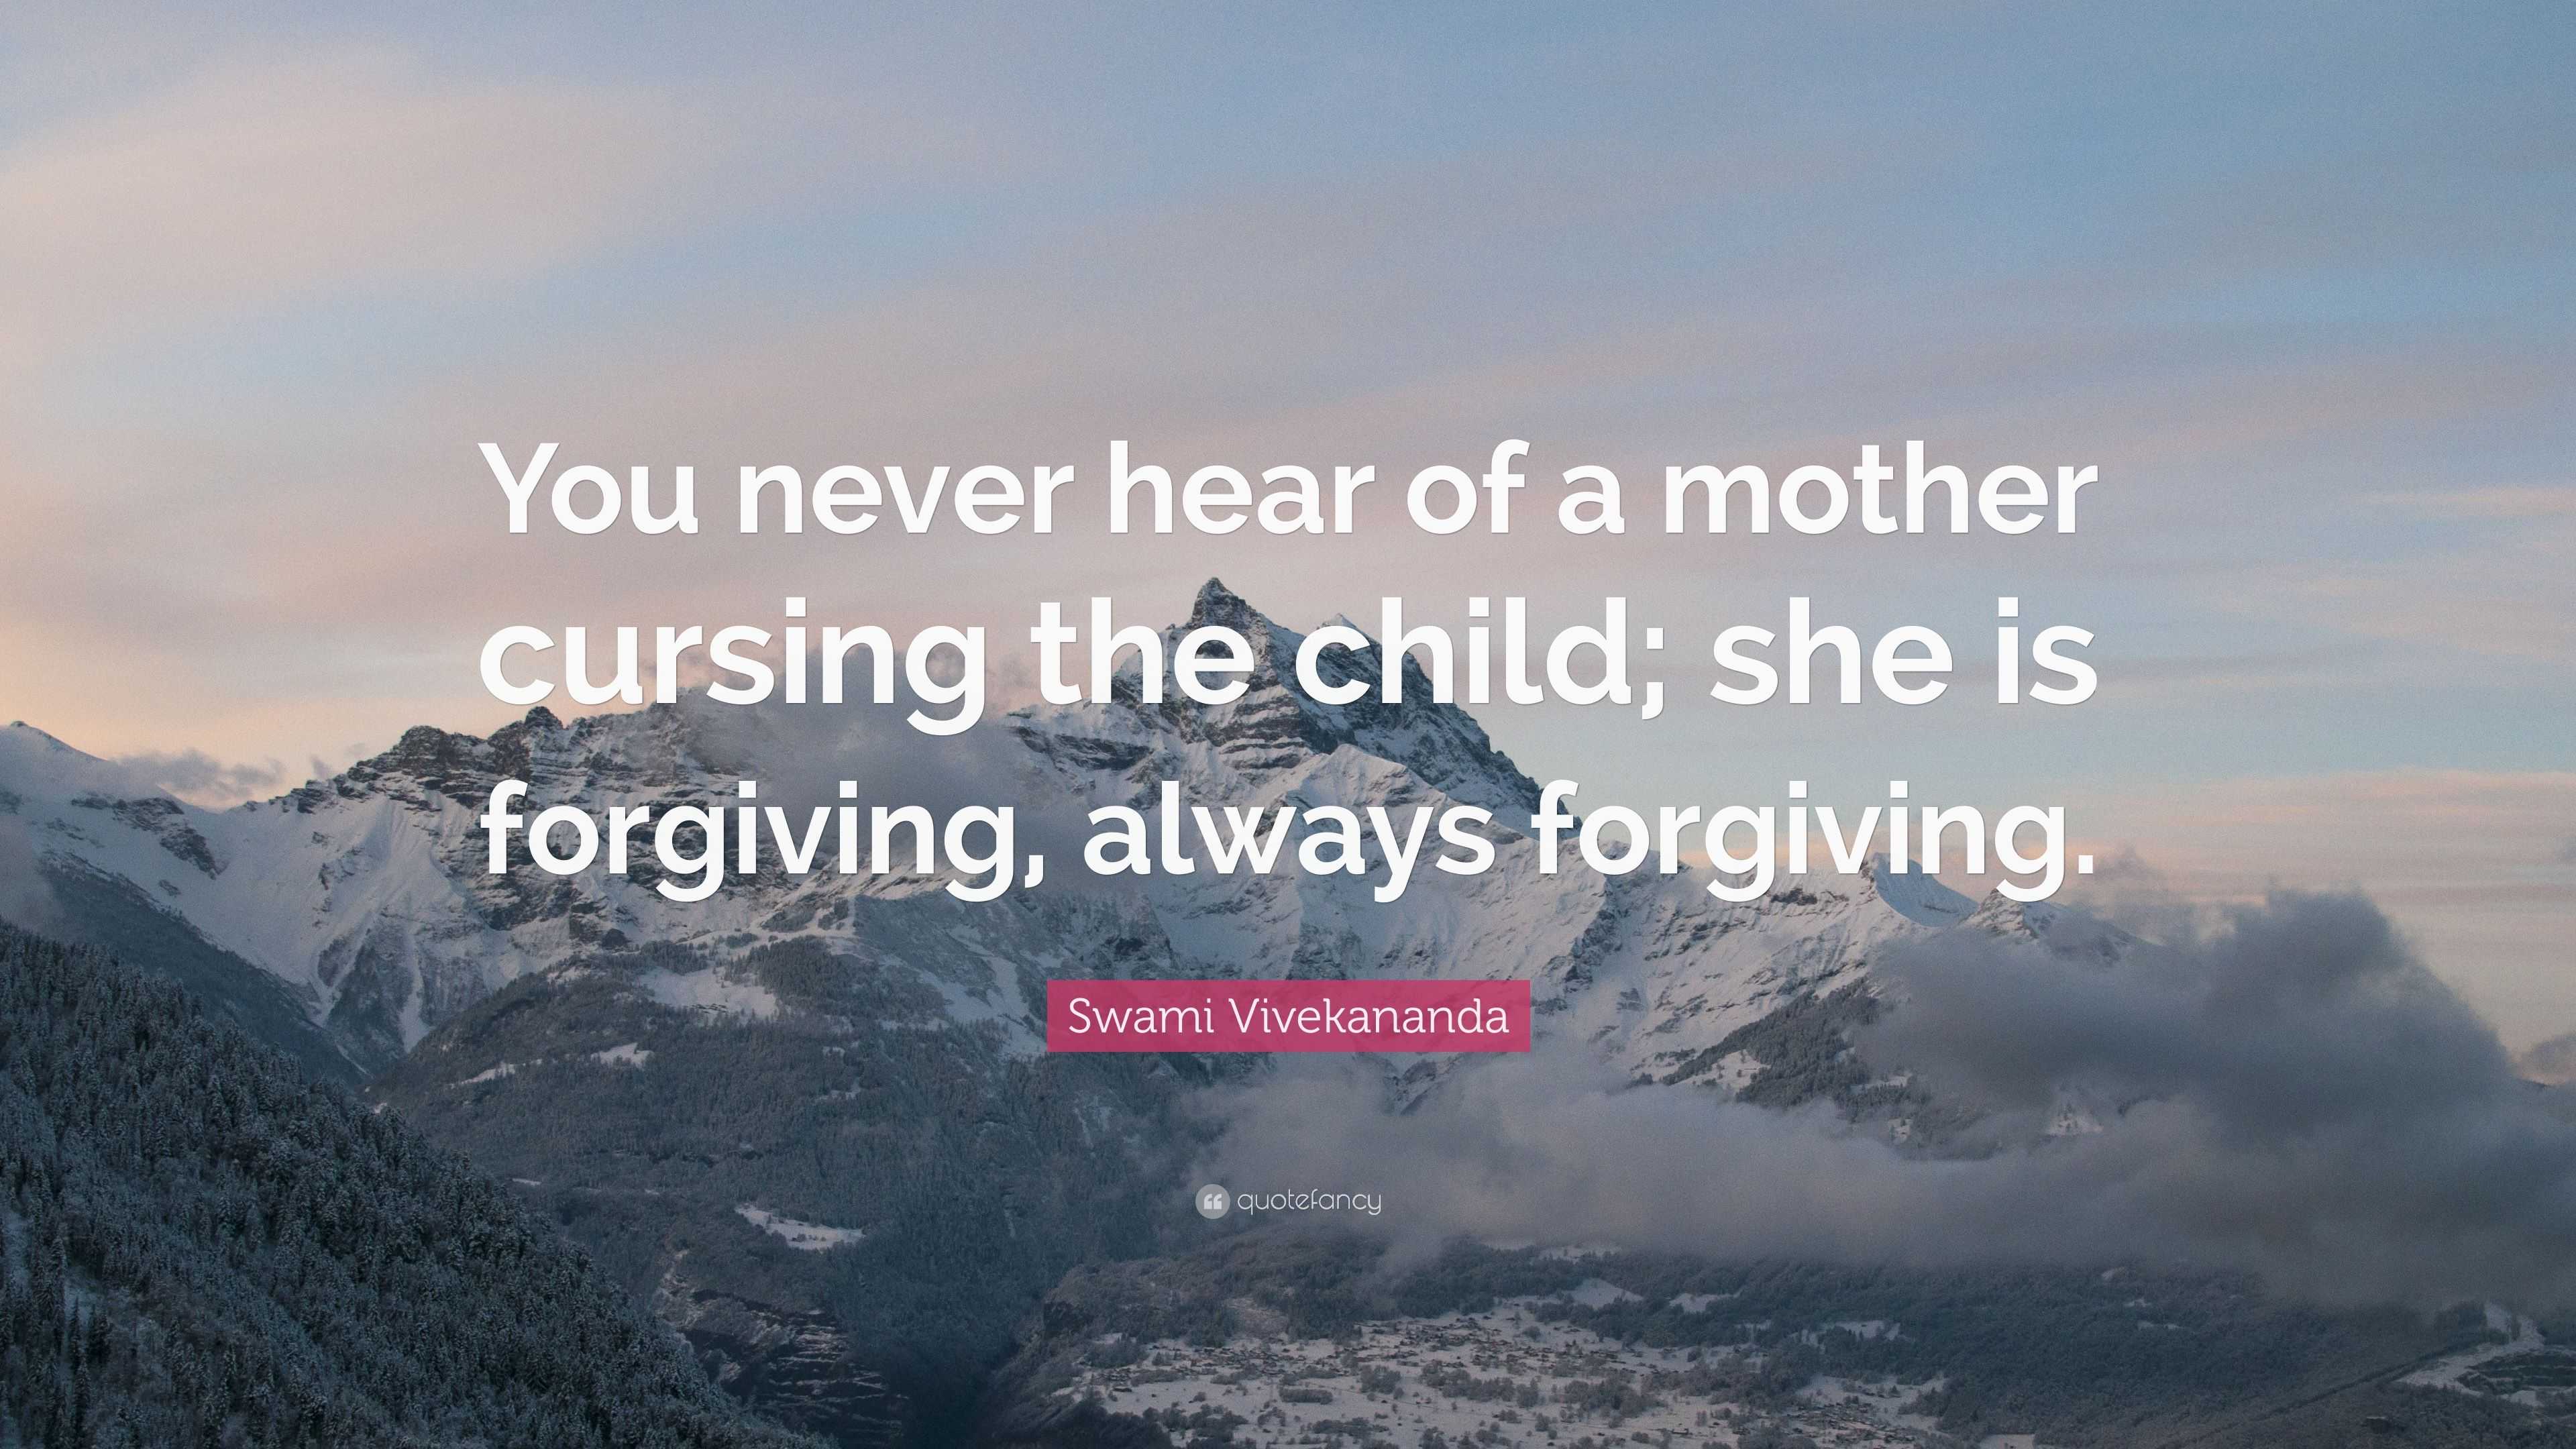 Swami Vivekananda Quote: “You never hear of a mother cursing the child ...